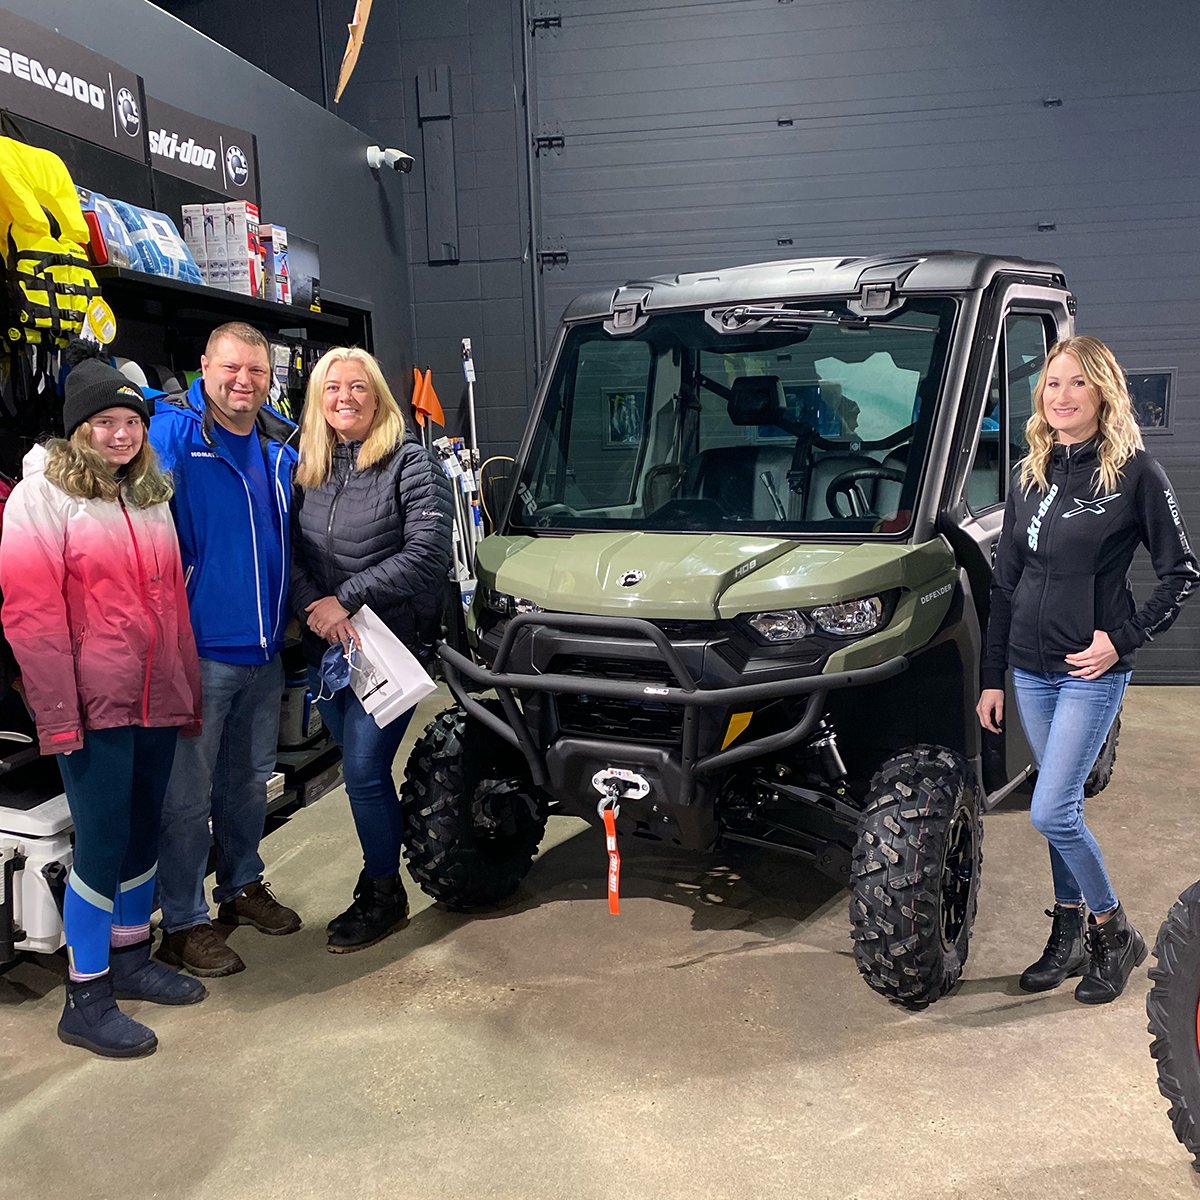 Congratulations Payne Family on your new 2021 Defender HD8 CAB with sales consultant Ashley!

#wpm
#mywestlock
#customerappreciation 
#canam
#offroadliving